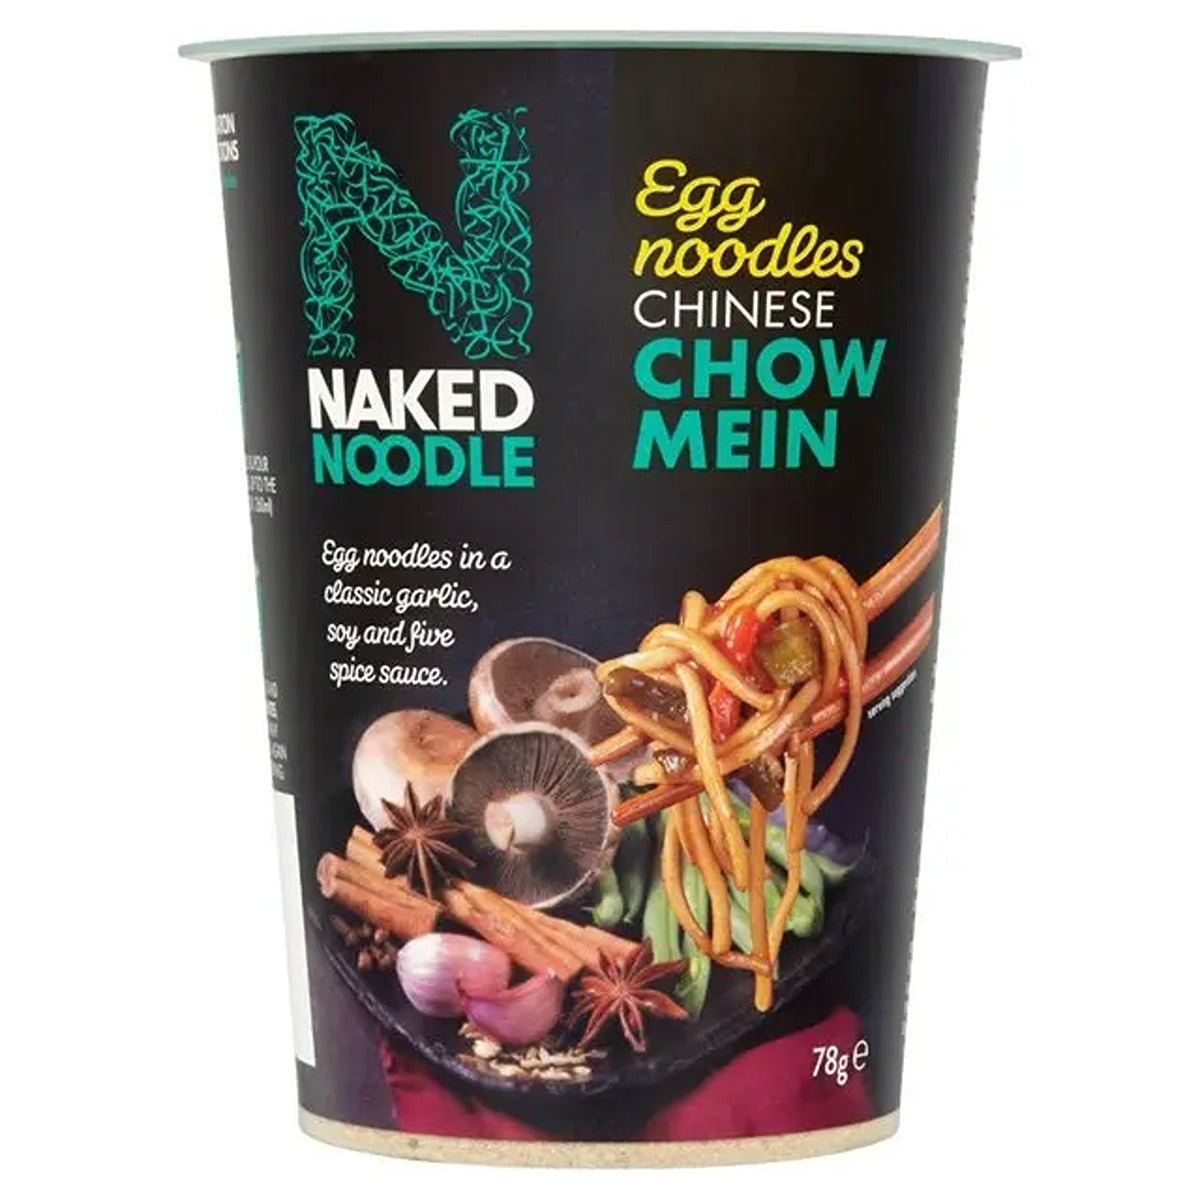 Naked - Noodle Chow Mein Noodles - 78g - Continental Food Store